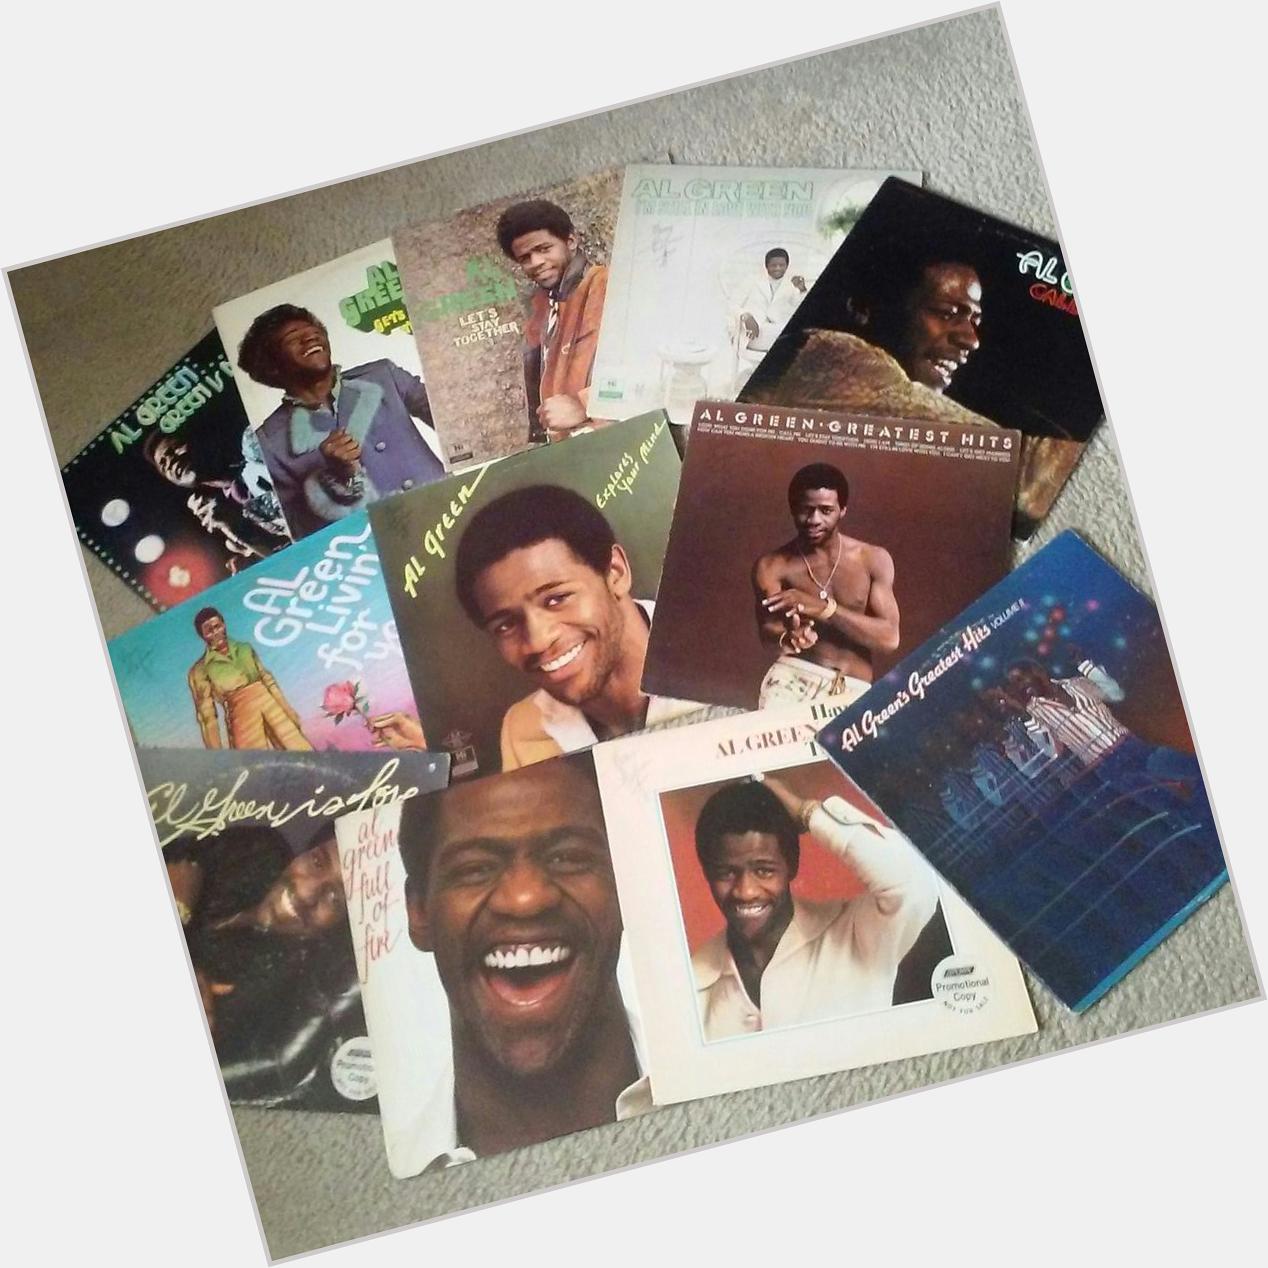 Happy birthday to Al Green! He has 6 songs in 
The Ever Made aka The Vol. 1 drops June 2nd 